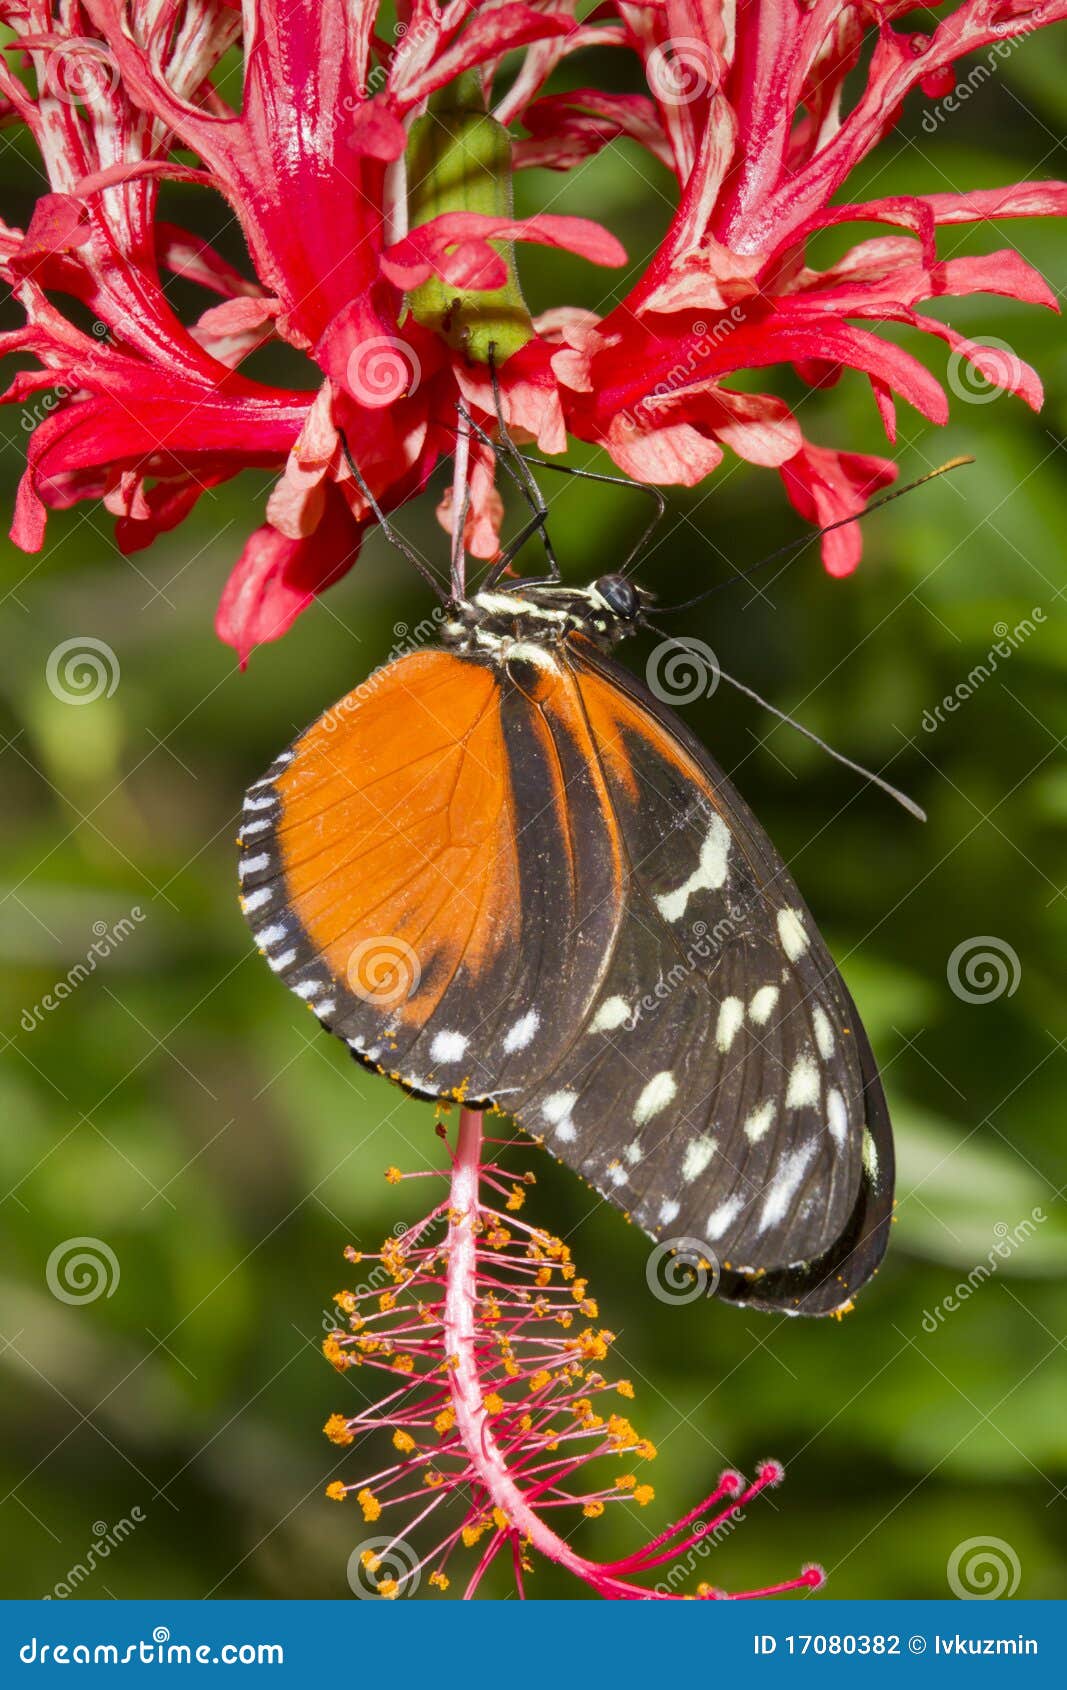 tiger longwing (heliconius hecale) on a flower